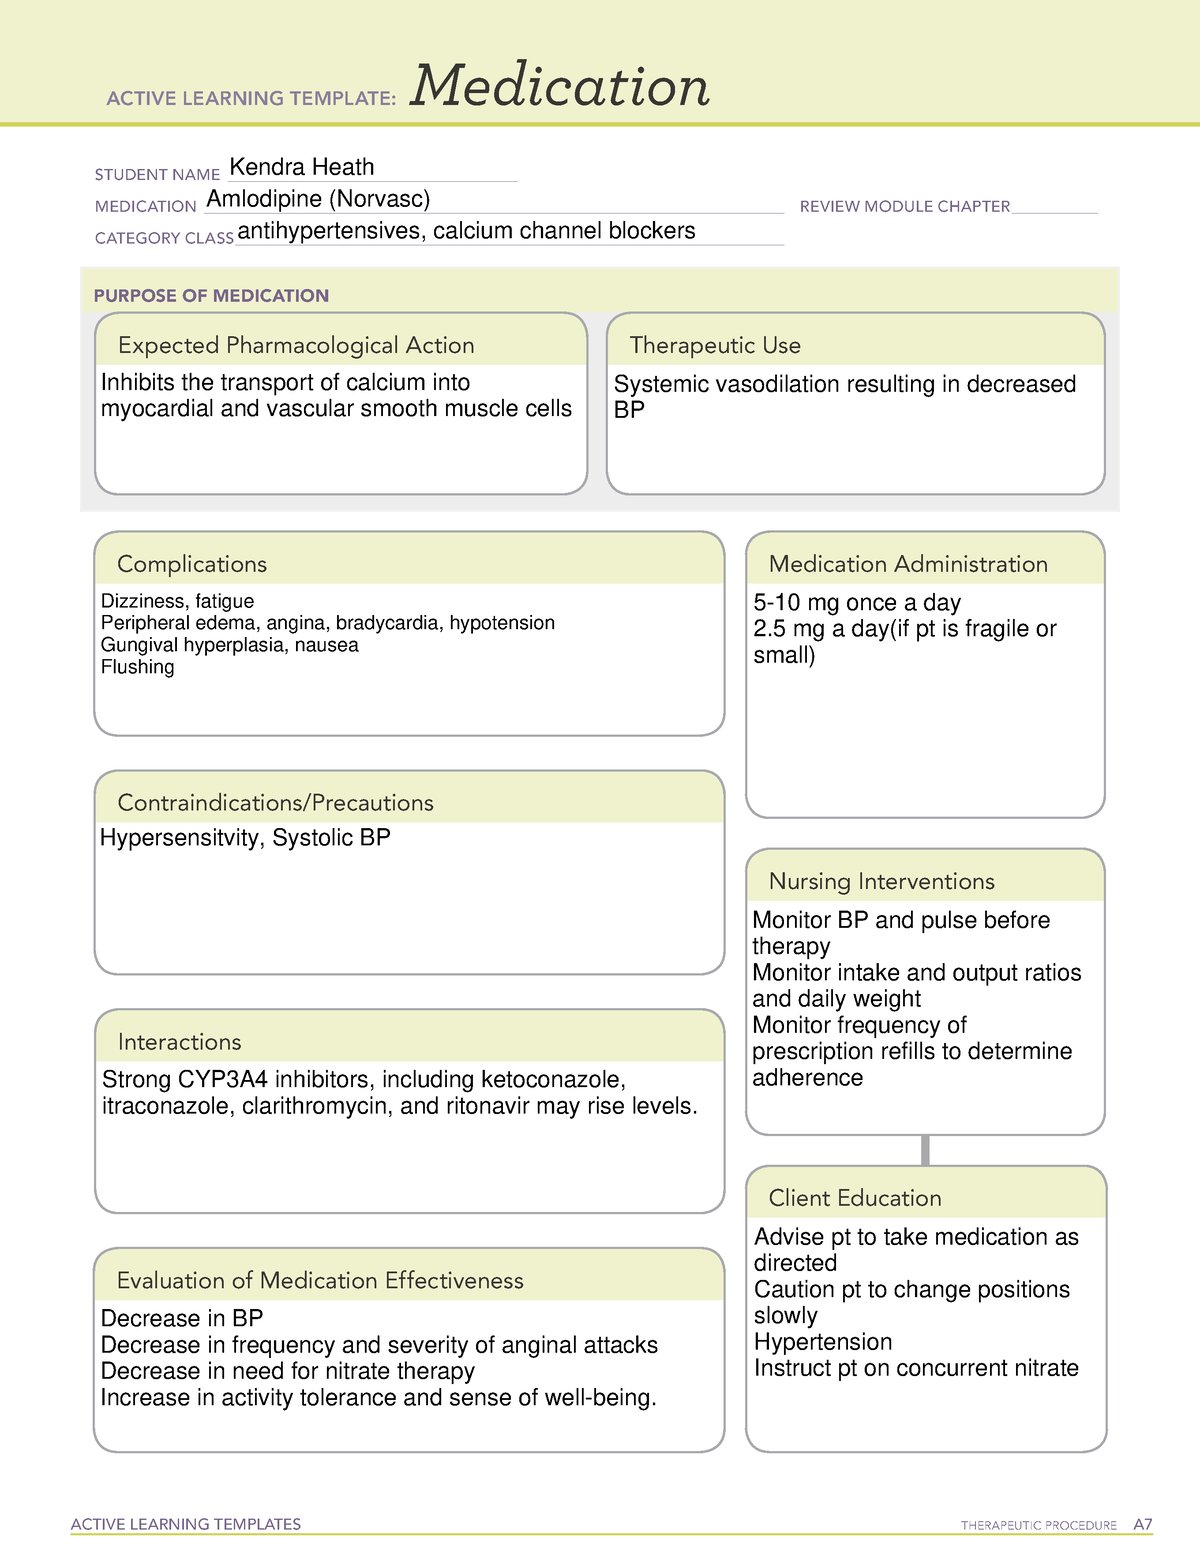 Amlodipine Med template ACTIVE LEARNING TEMPLATES THERAPEUTIC